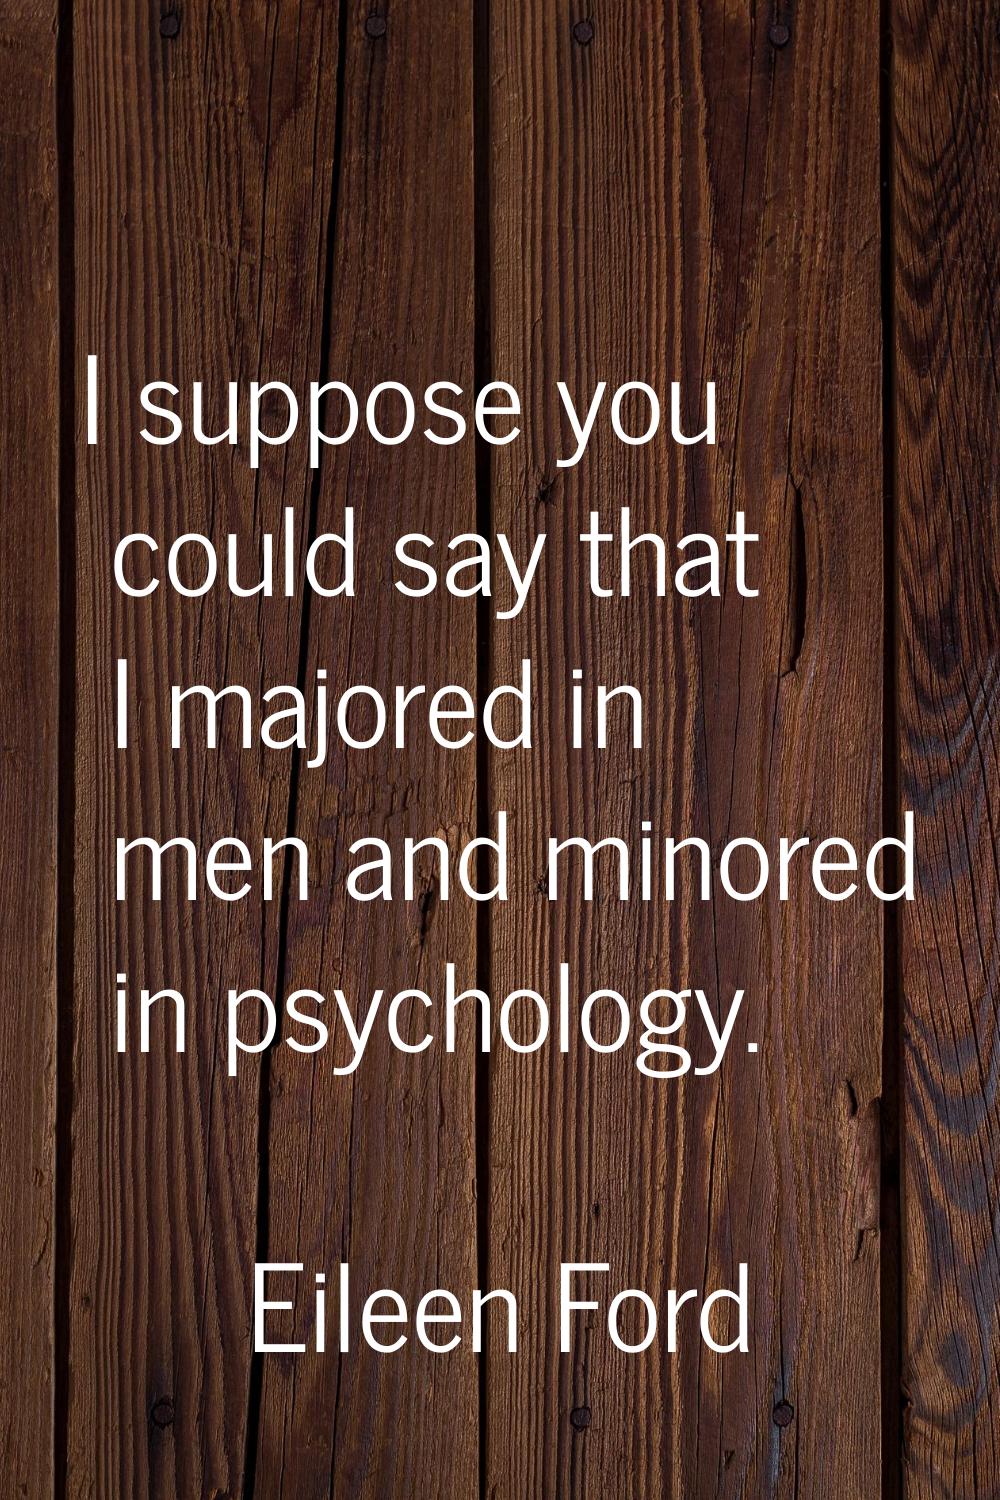 I suppose you could say that I majored in men and minored in psychology.